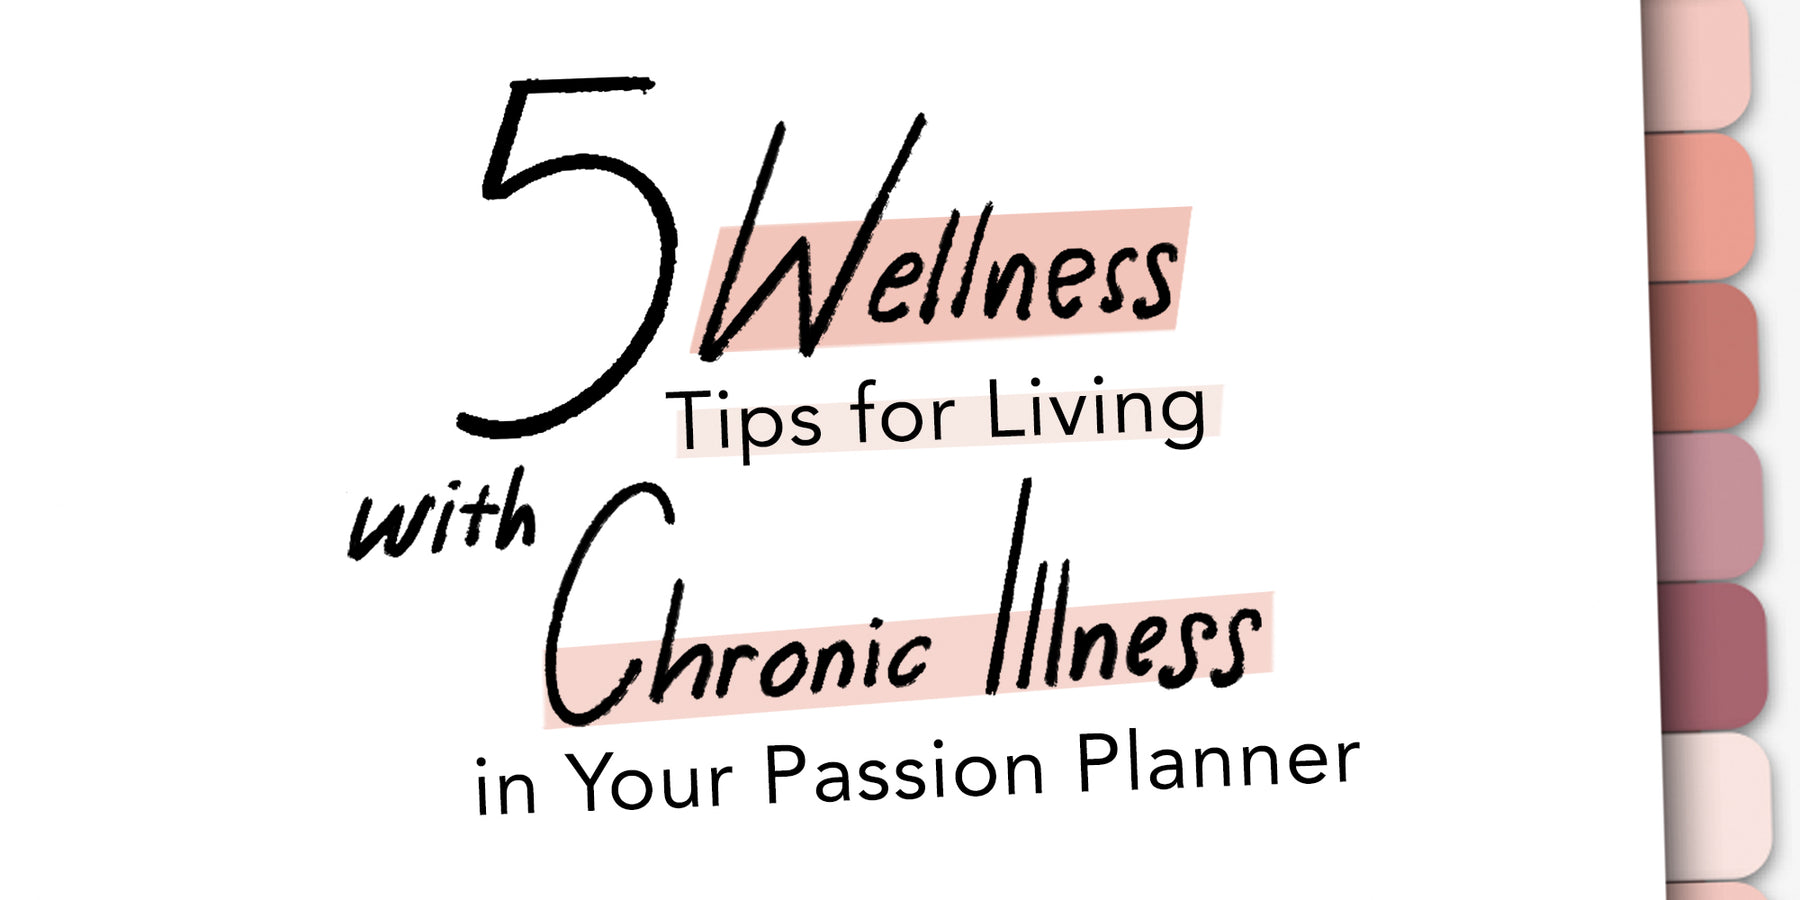 5 Wellness Tips for Living with Chronic Illness in Your Passion Planner